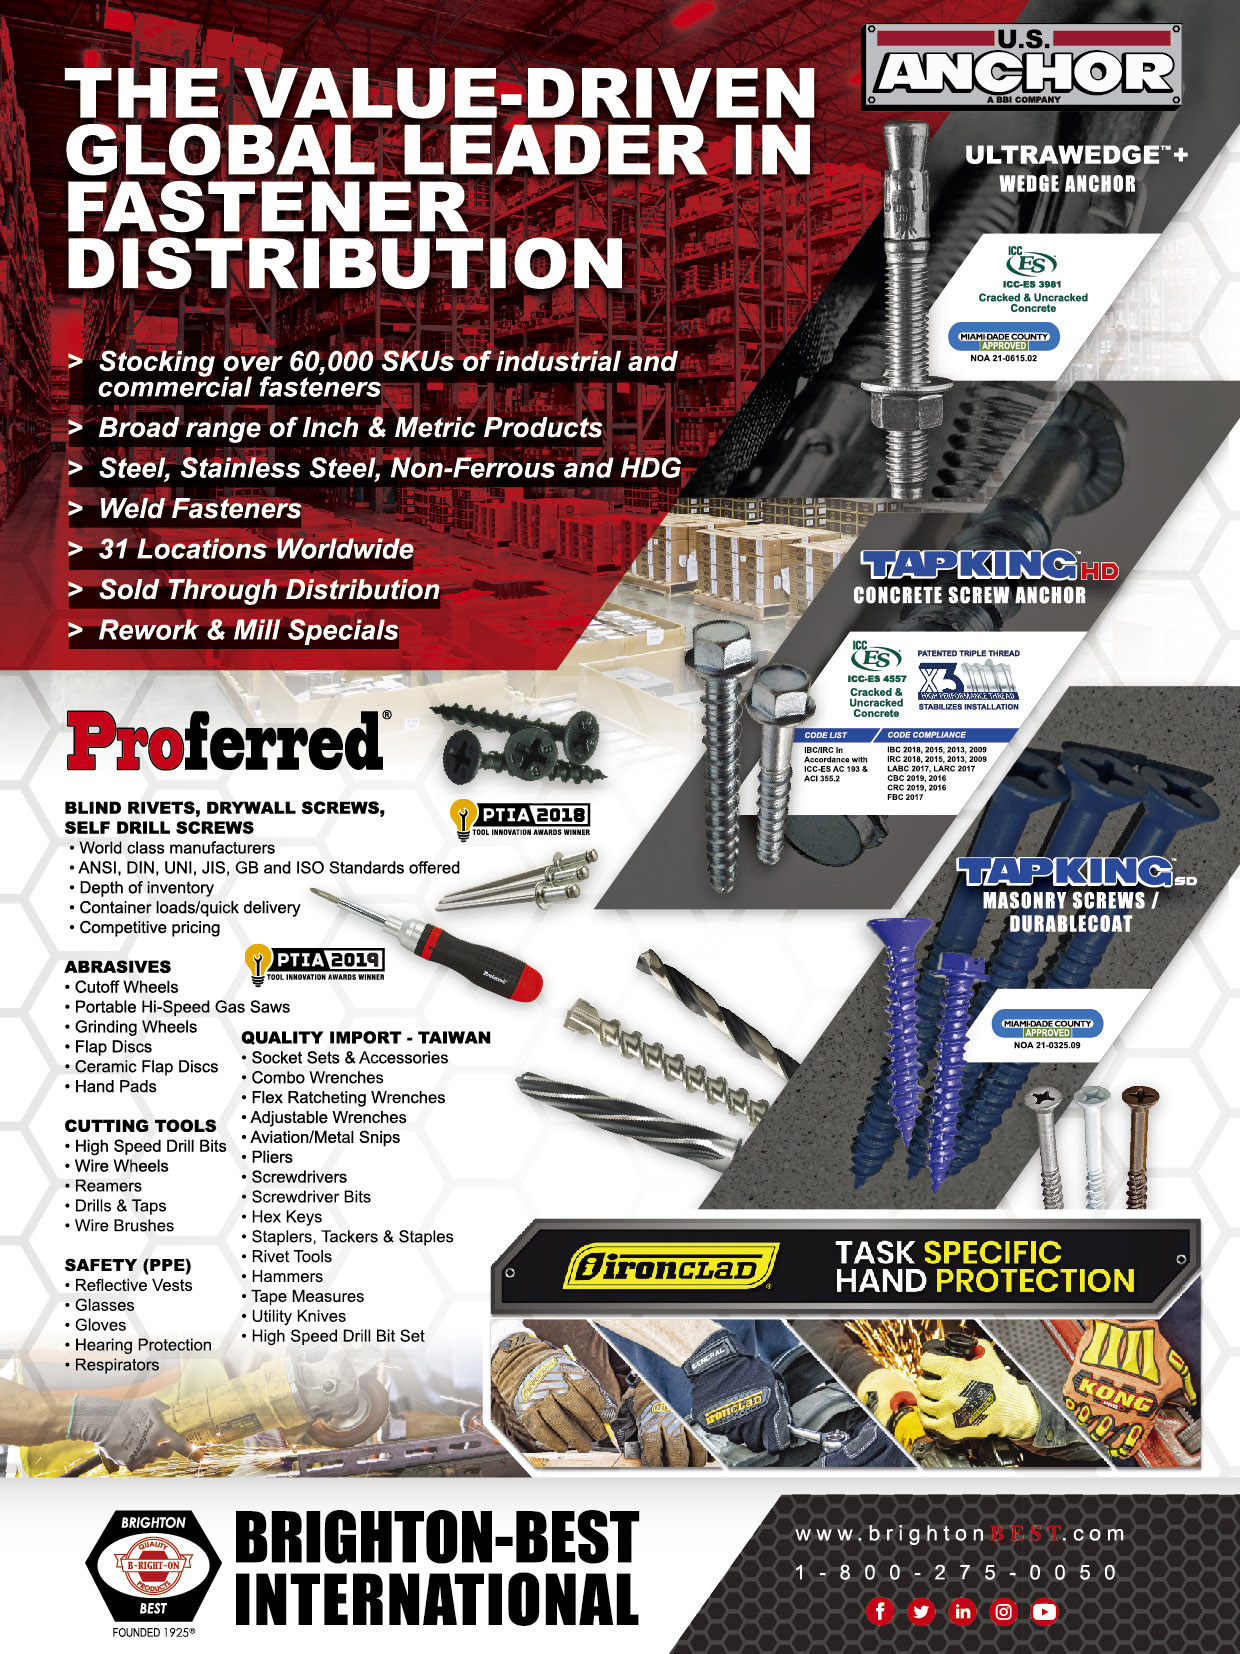 BRIGHTON-BEST INTERNATIONAL, INC.  , Blind Rivets, Drywall Screws, Self Drill Screws , All Kinds Of Building Materials And Accessories